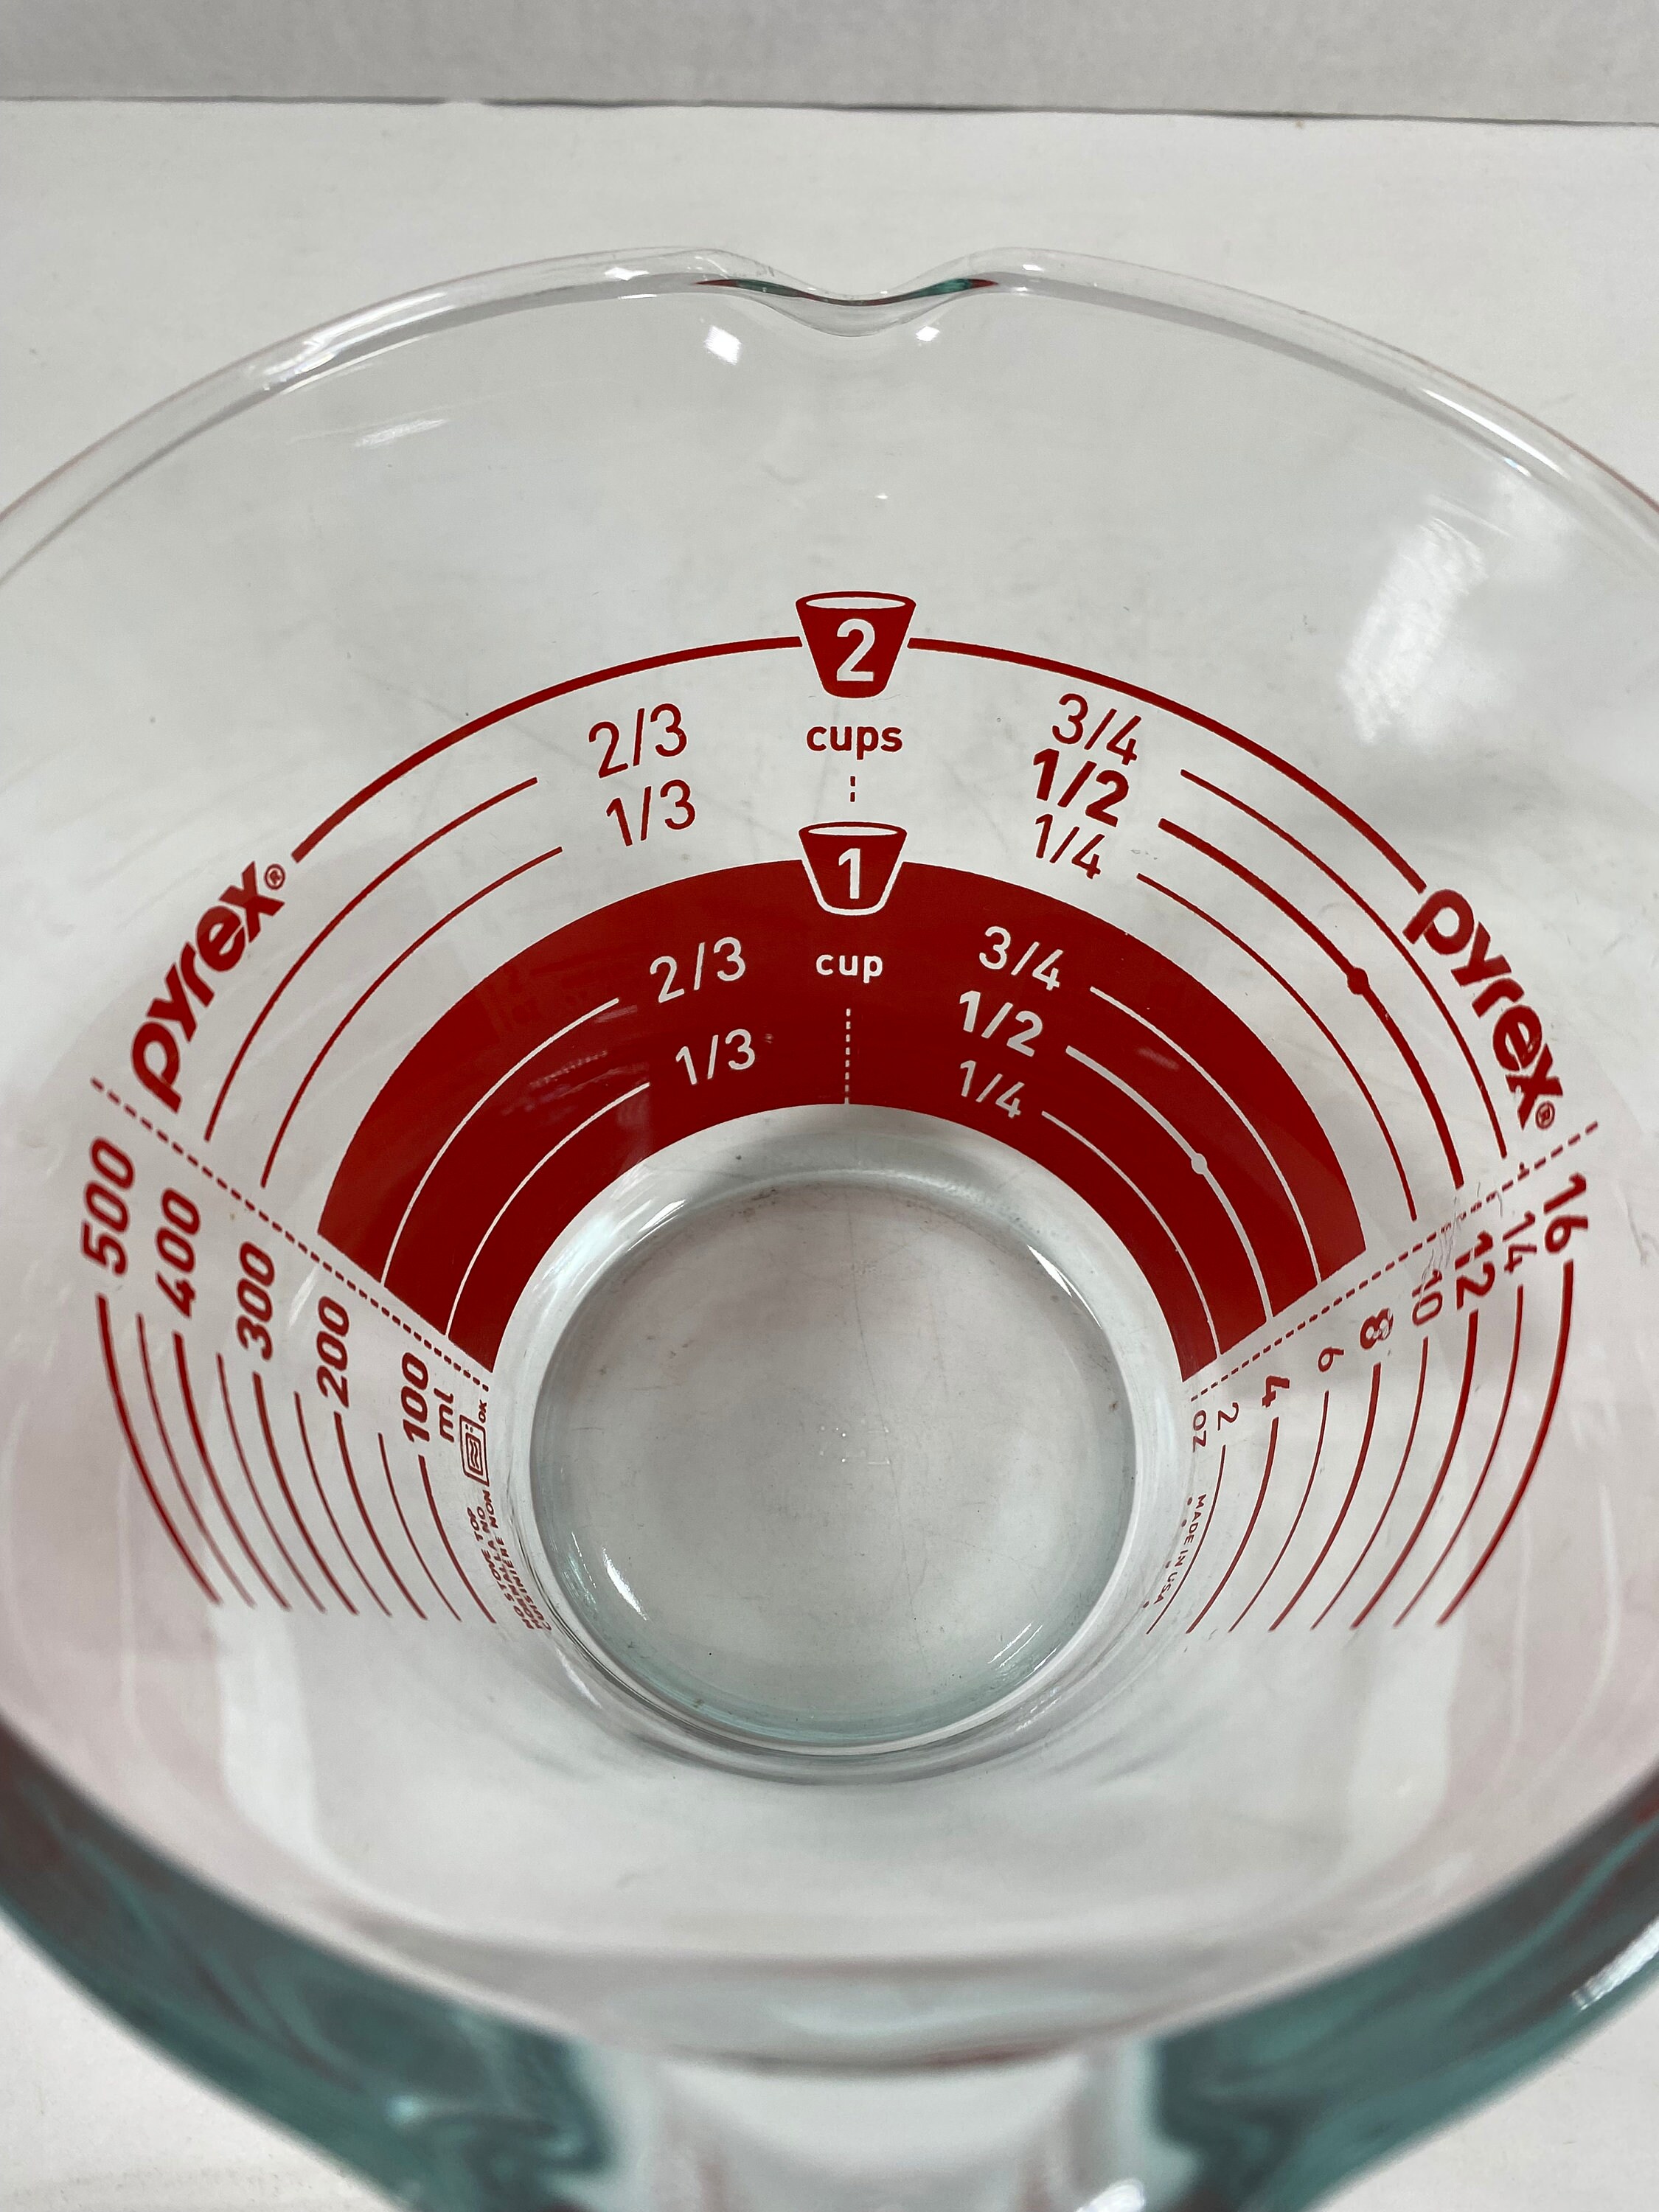 Vintage Pyrex 2 Cup Capacity Measuring Cup, Clear with Red Lettering